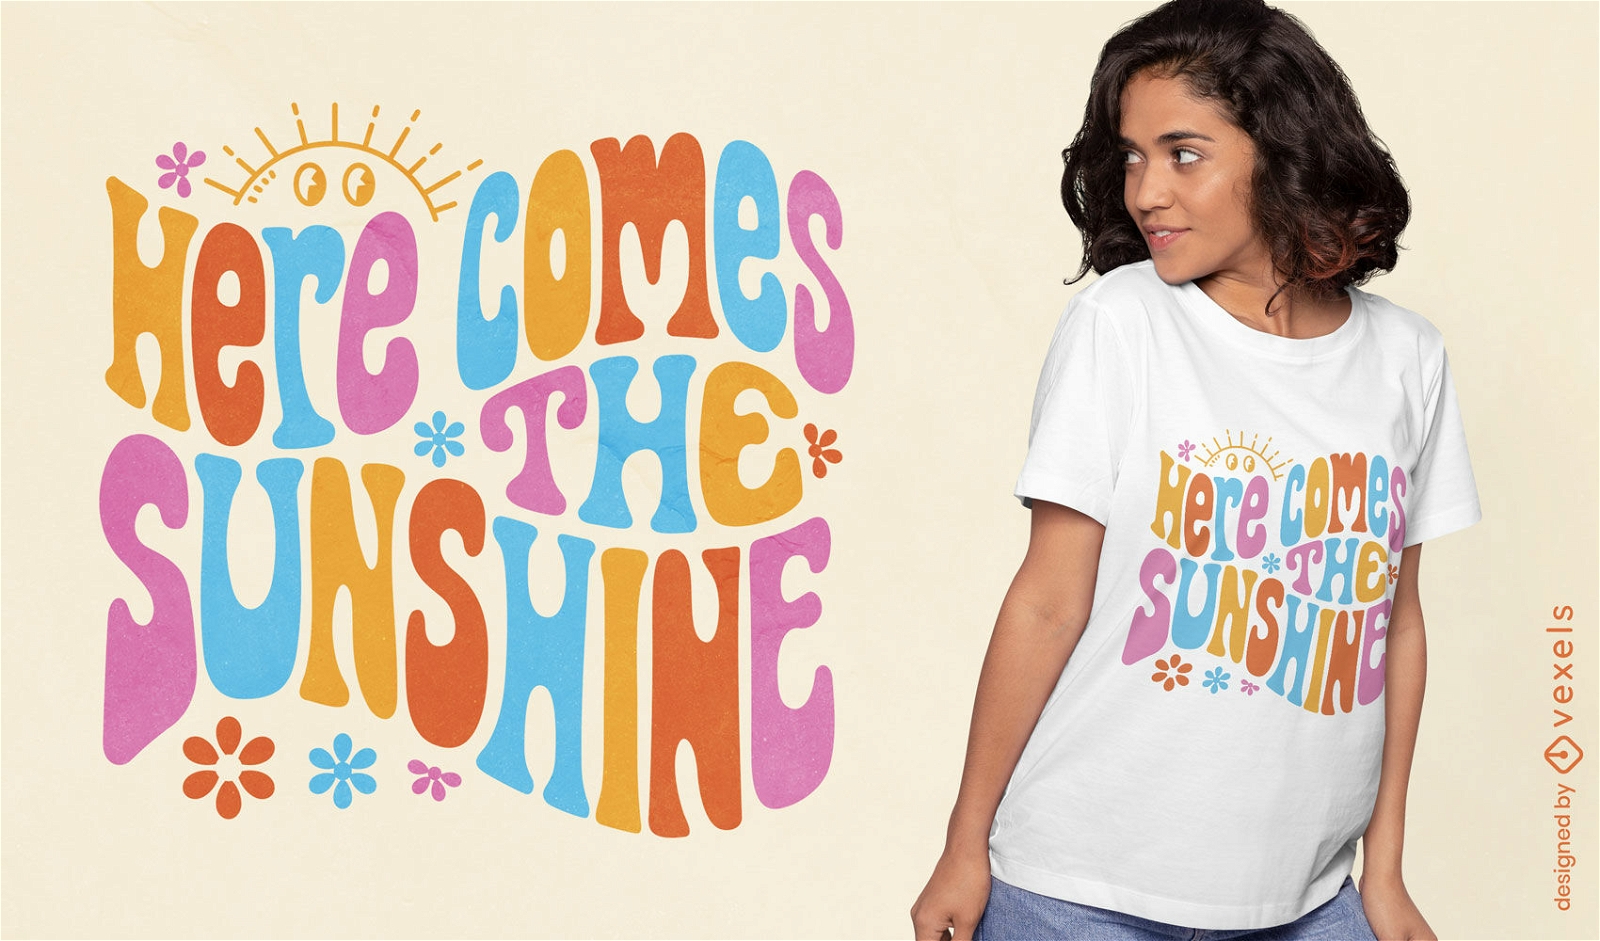 Here comes the sunshine quote t-shirt design